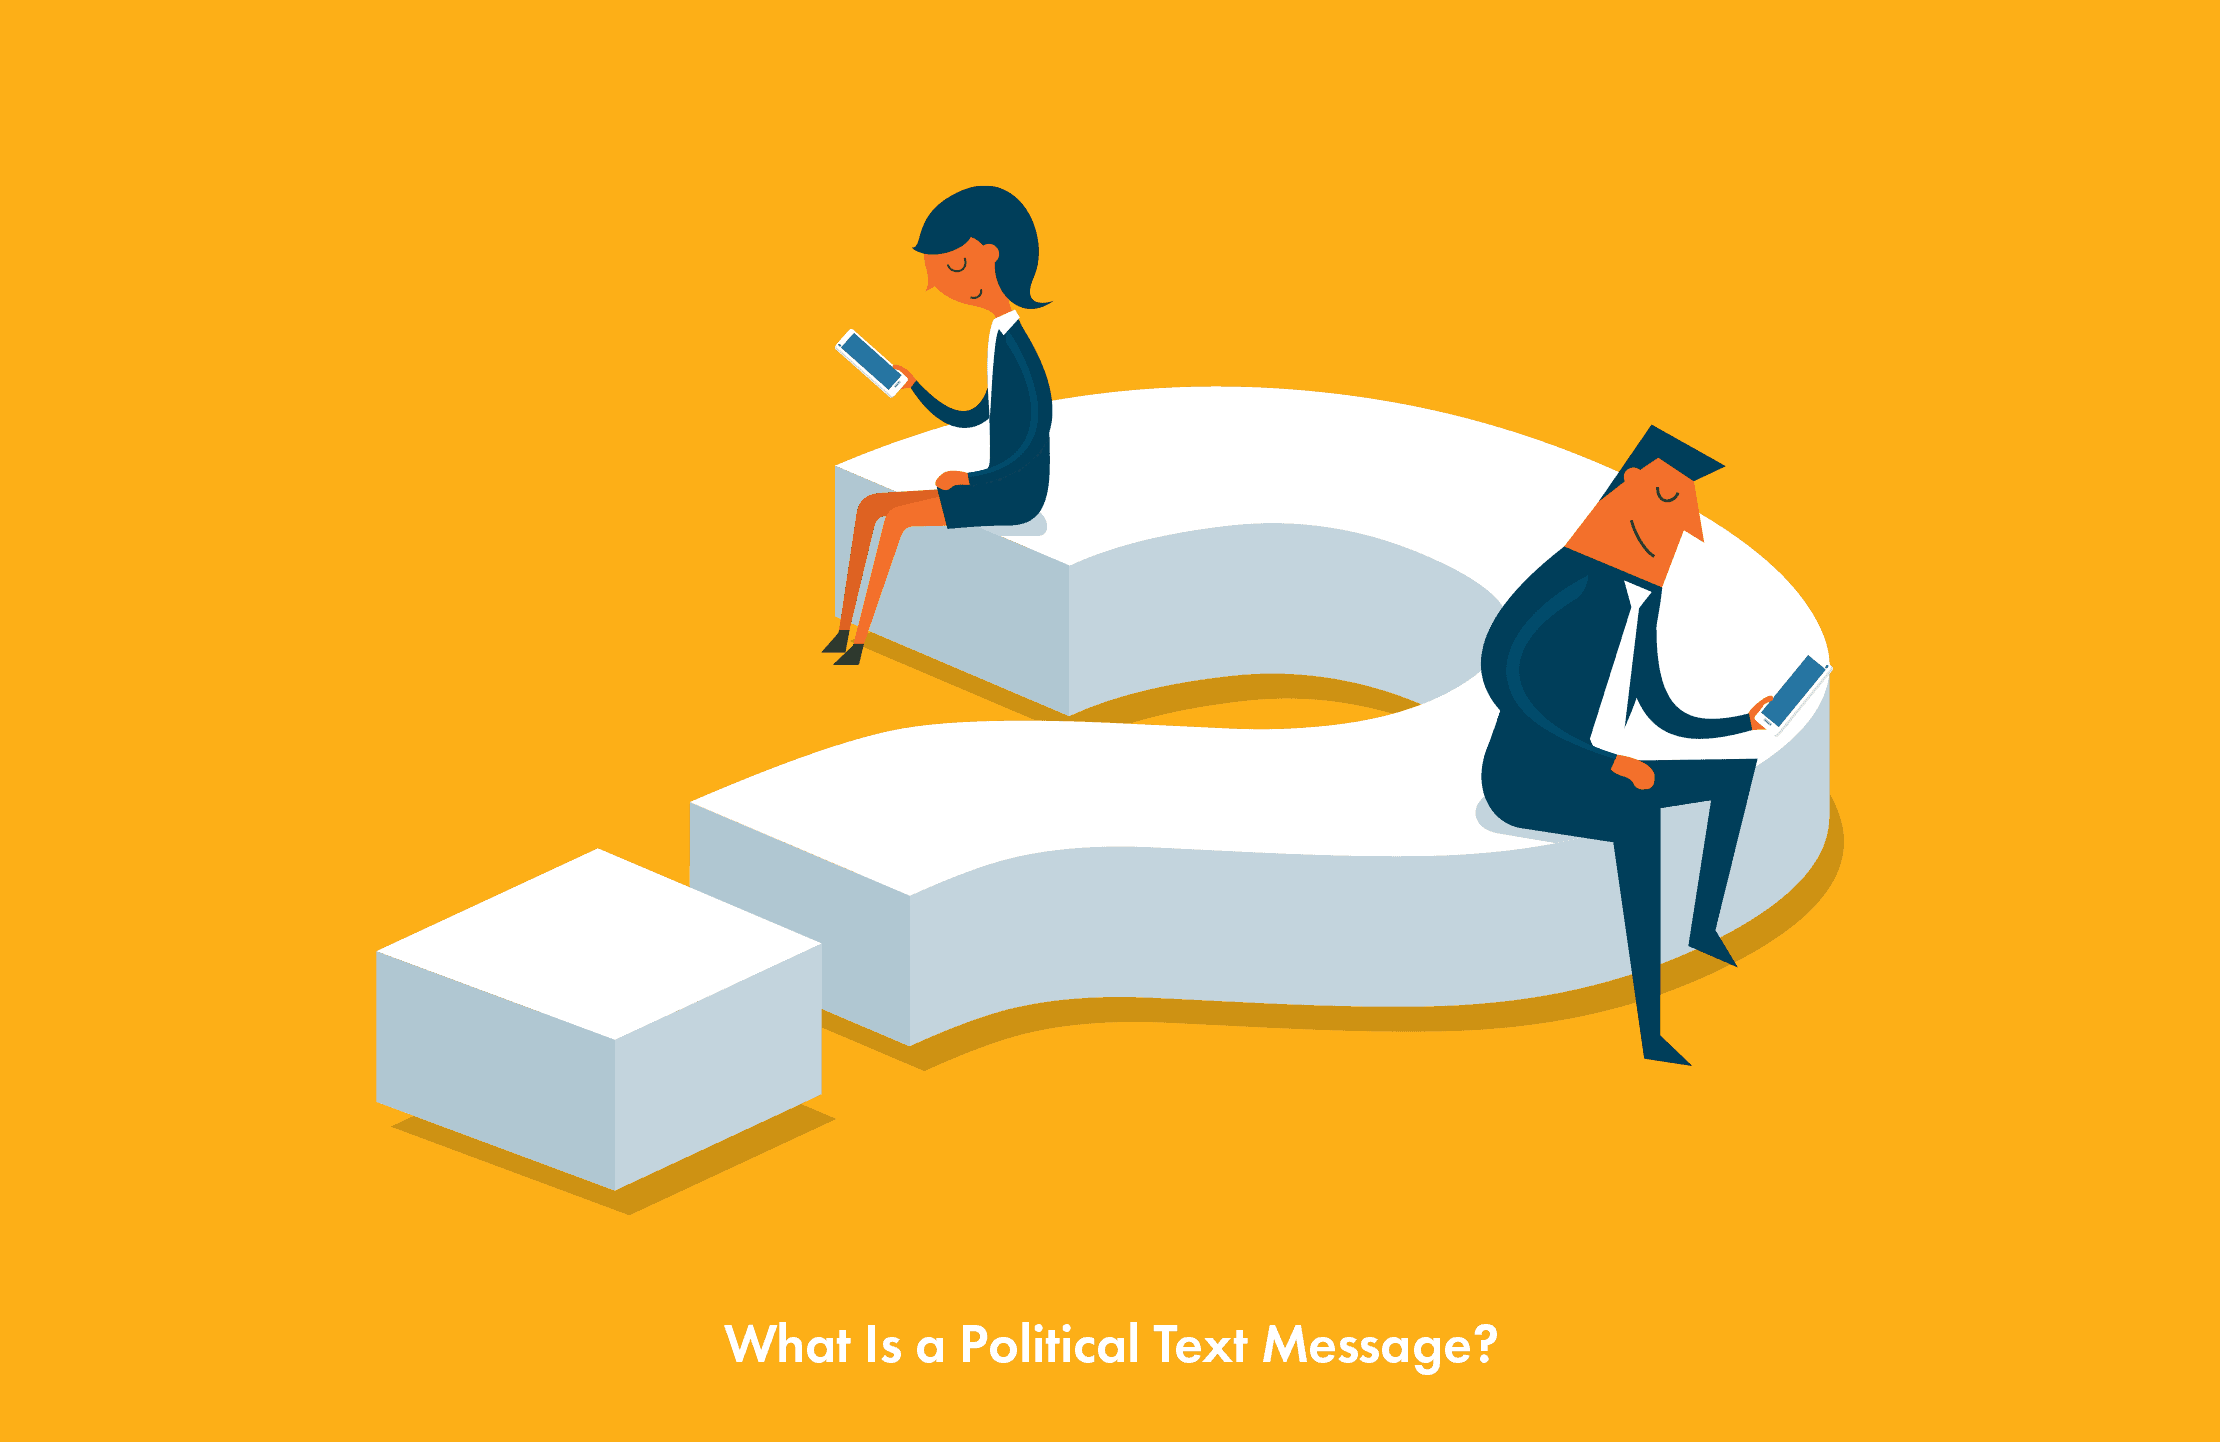 What Is a Political Text Message